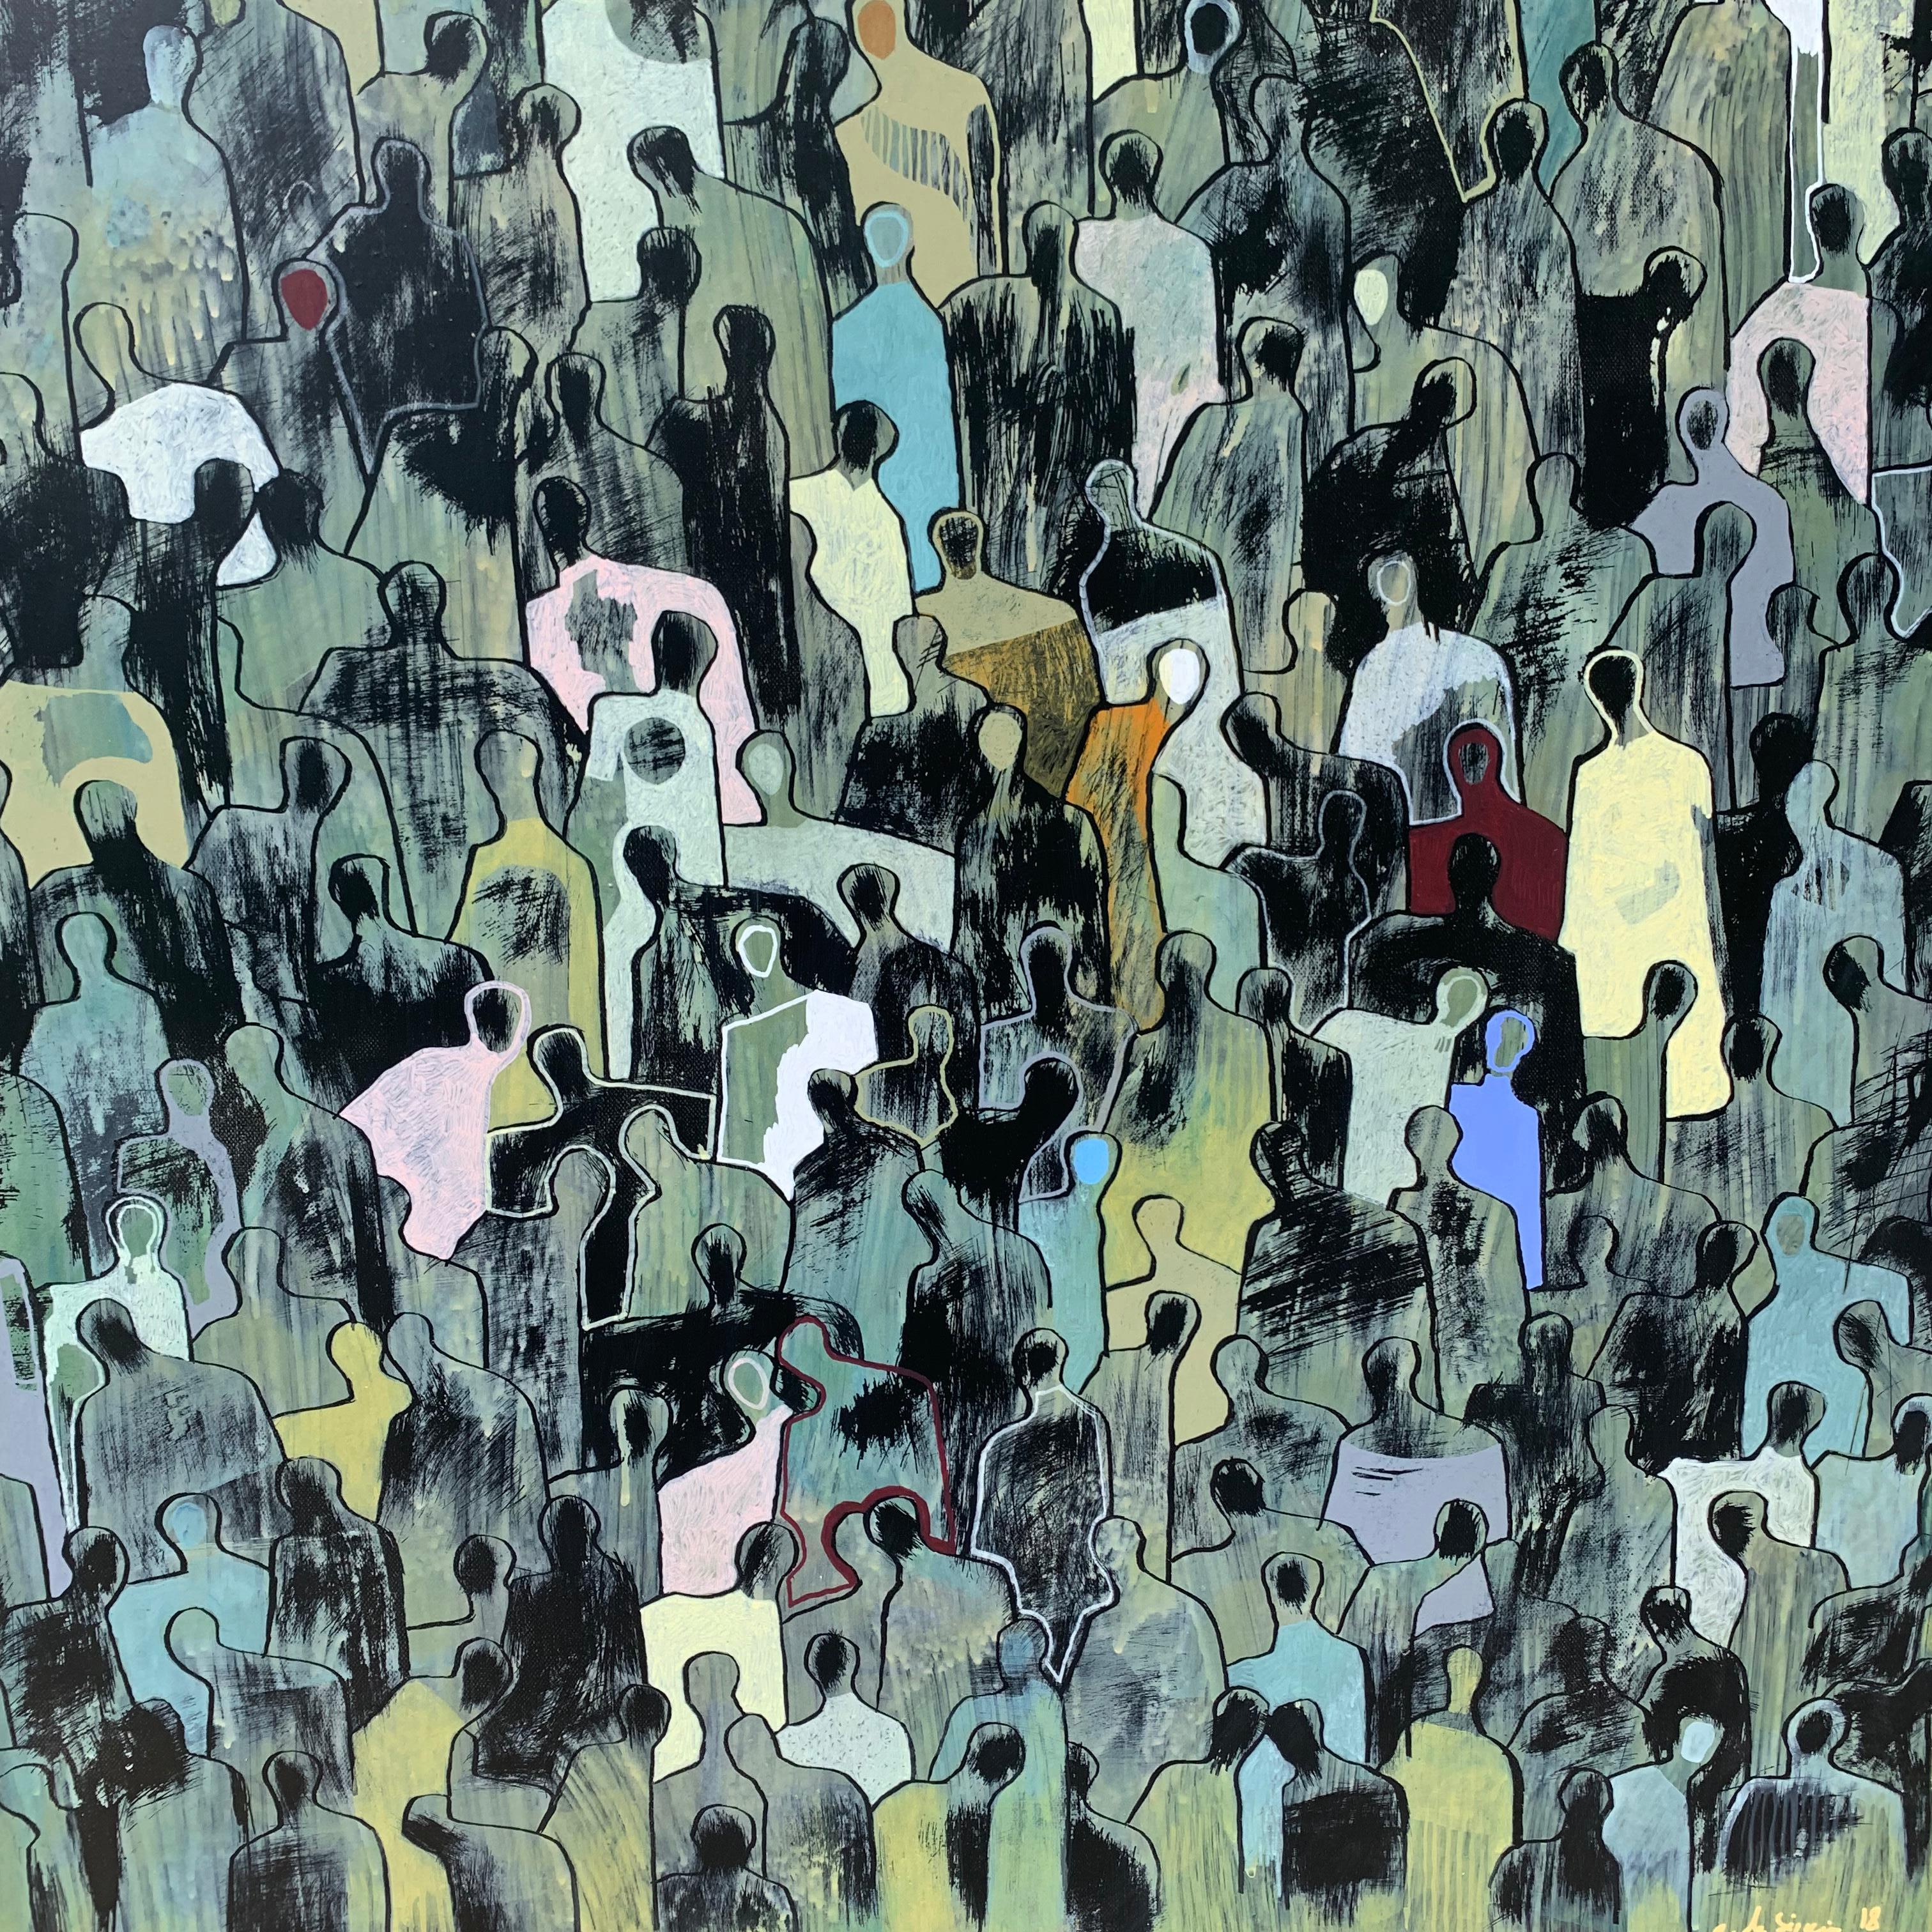 
Gaetan de Seguin paints figurative works, with an abstract character. The various colors highlight that not one person is the same, and his artworks celebrate this individuality in a contemporary and elegant way. His 'crowd' paintings also showcase